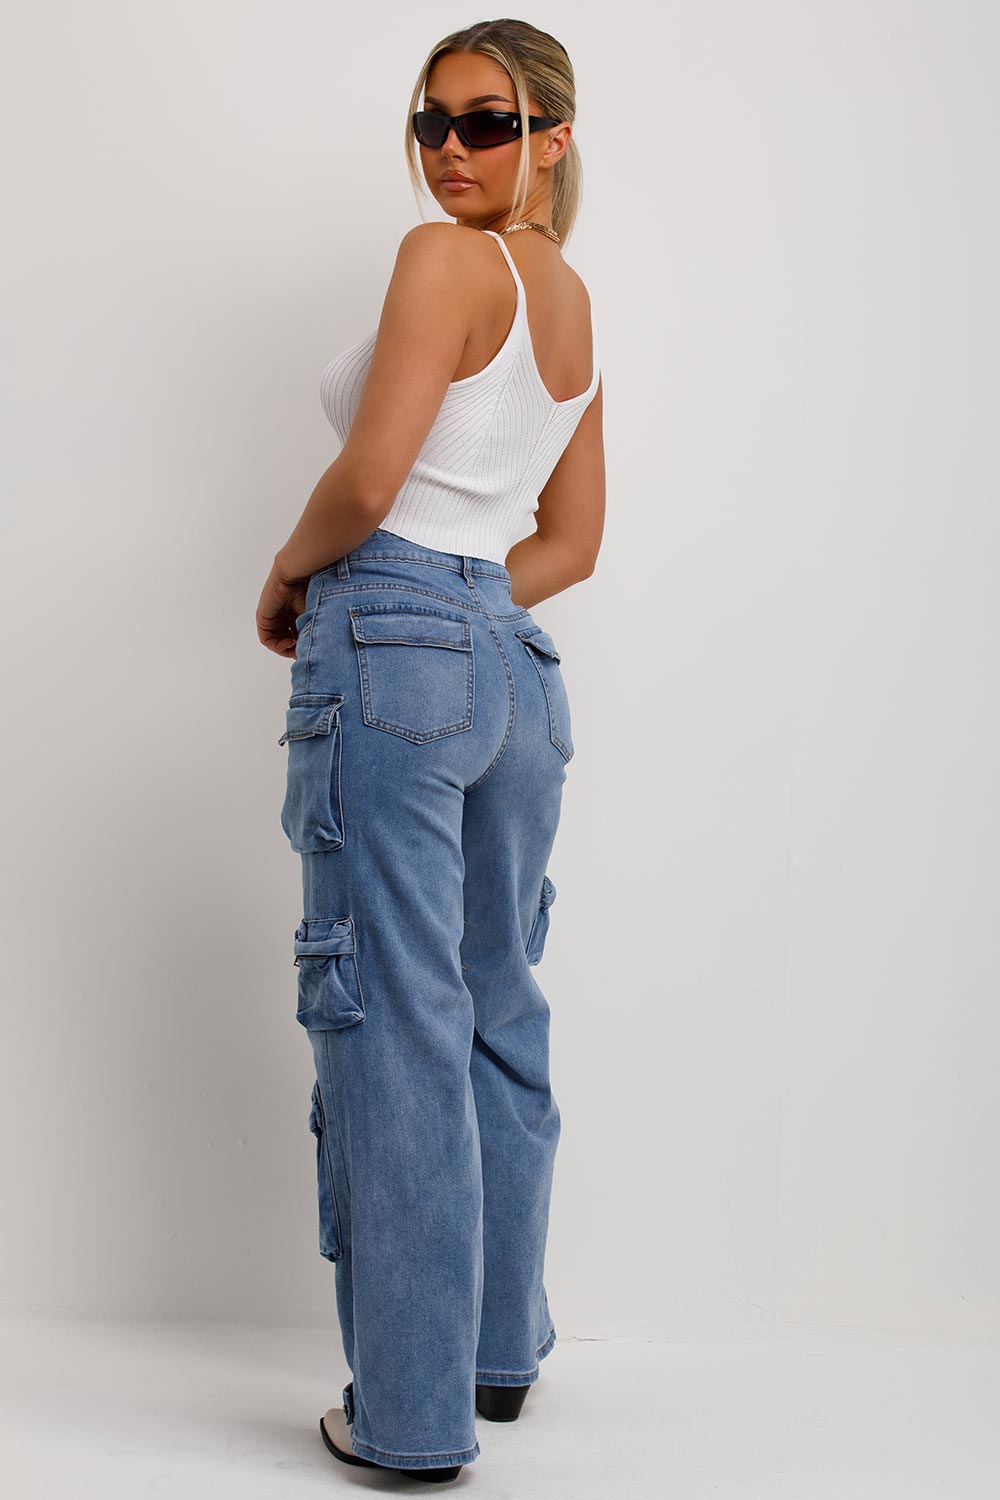 cargo pocket jeans with wide legs womens